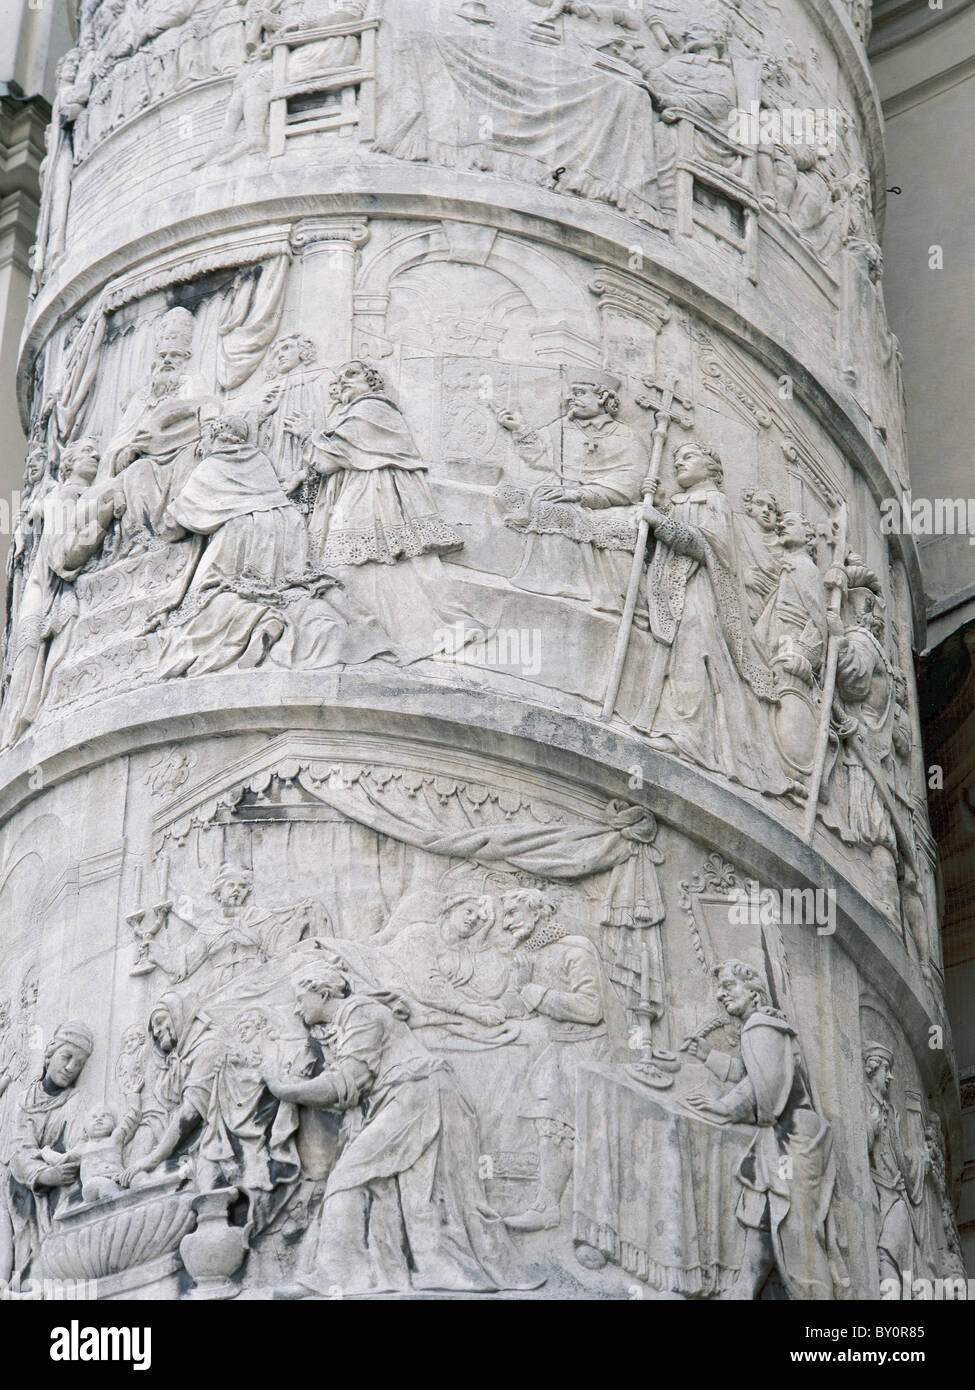 Karlskirche. Column on the left side of the church depicting scenes from the life of St. Charles Borromeo. Vienna. Austria. Stock Photo